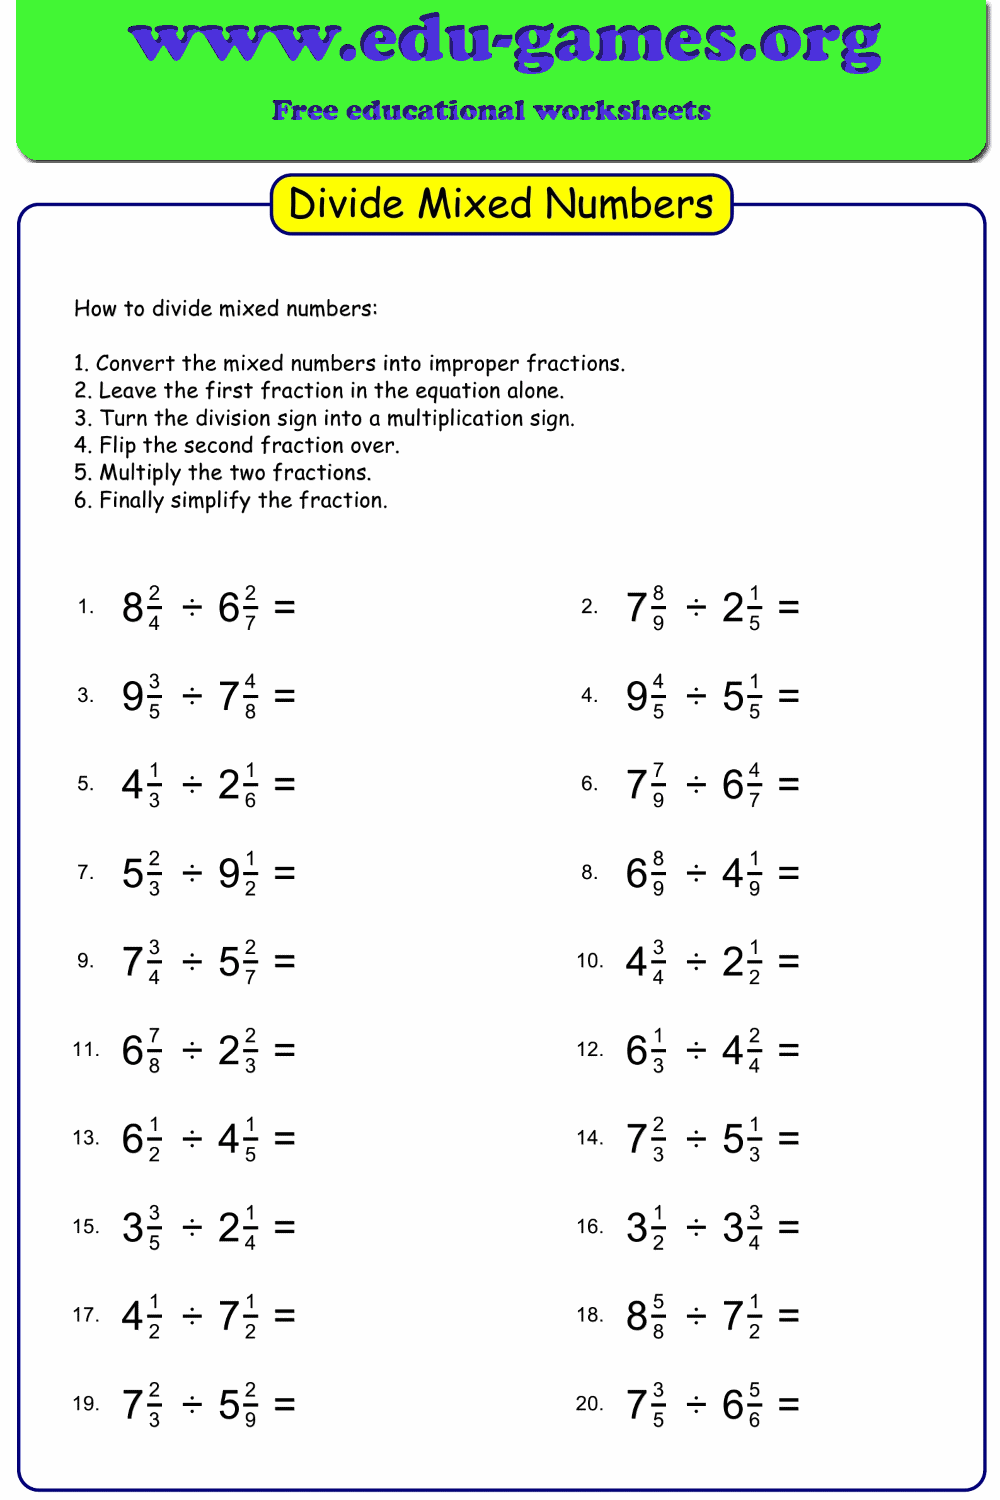 Free Dividing Mixed Numbers Worksheets Intended For Dividing Mixed Numbers Worksheet